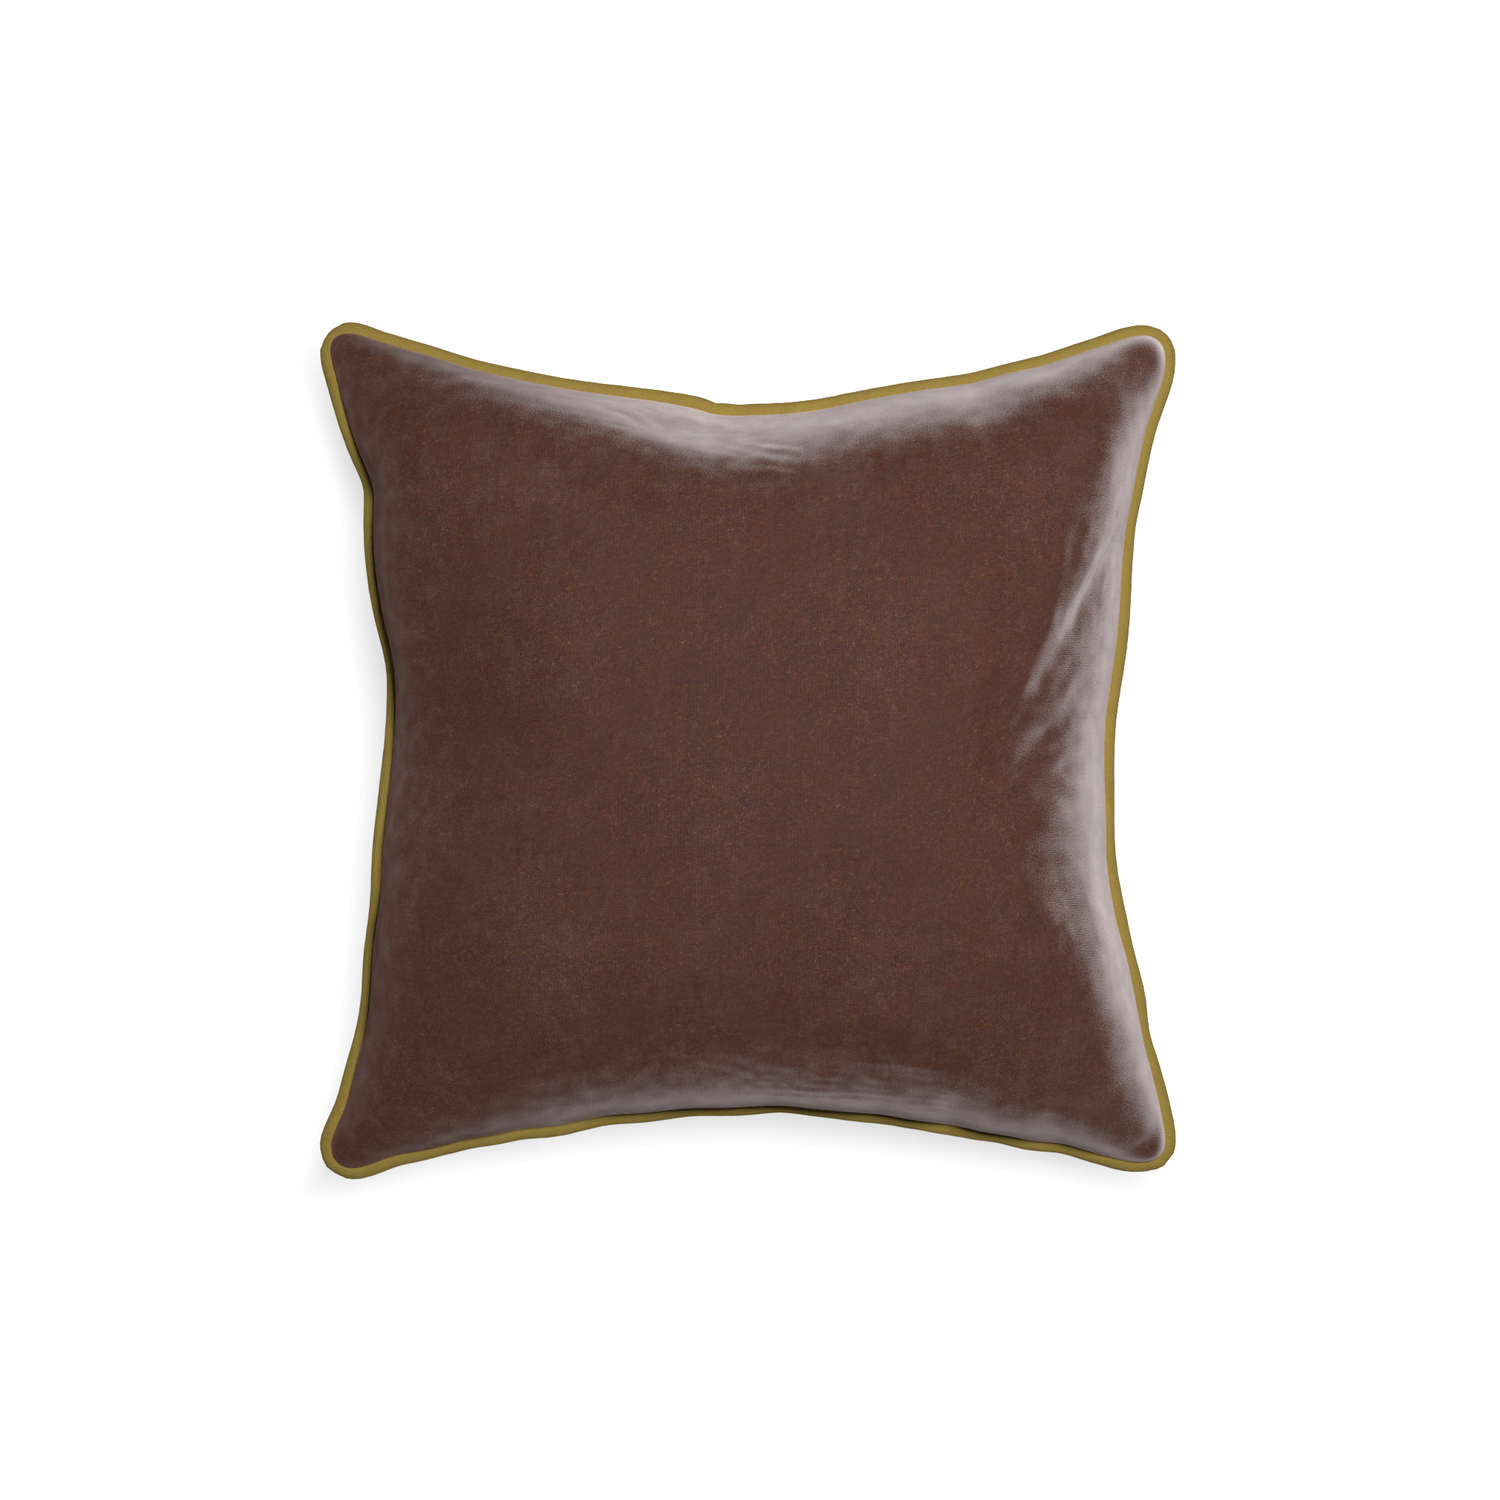 18-square walnut velvet custom brownpillow with c piping on white background